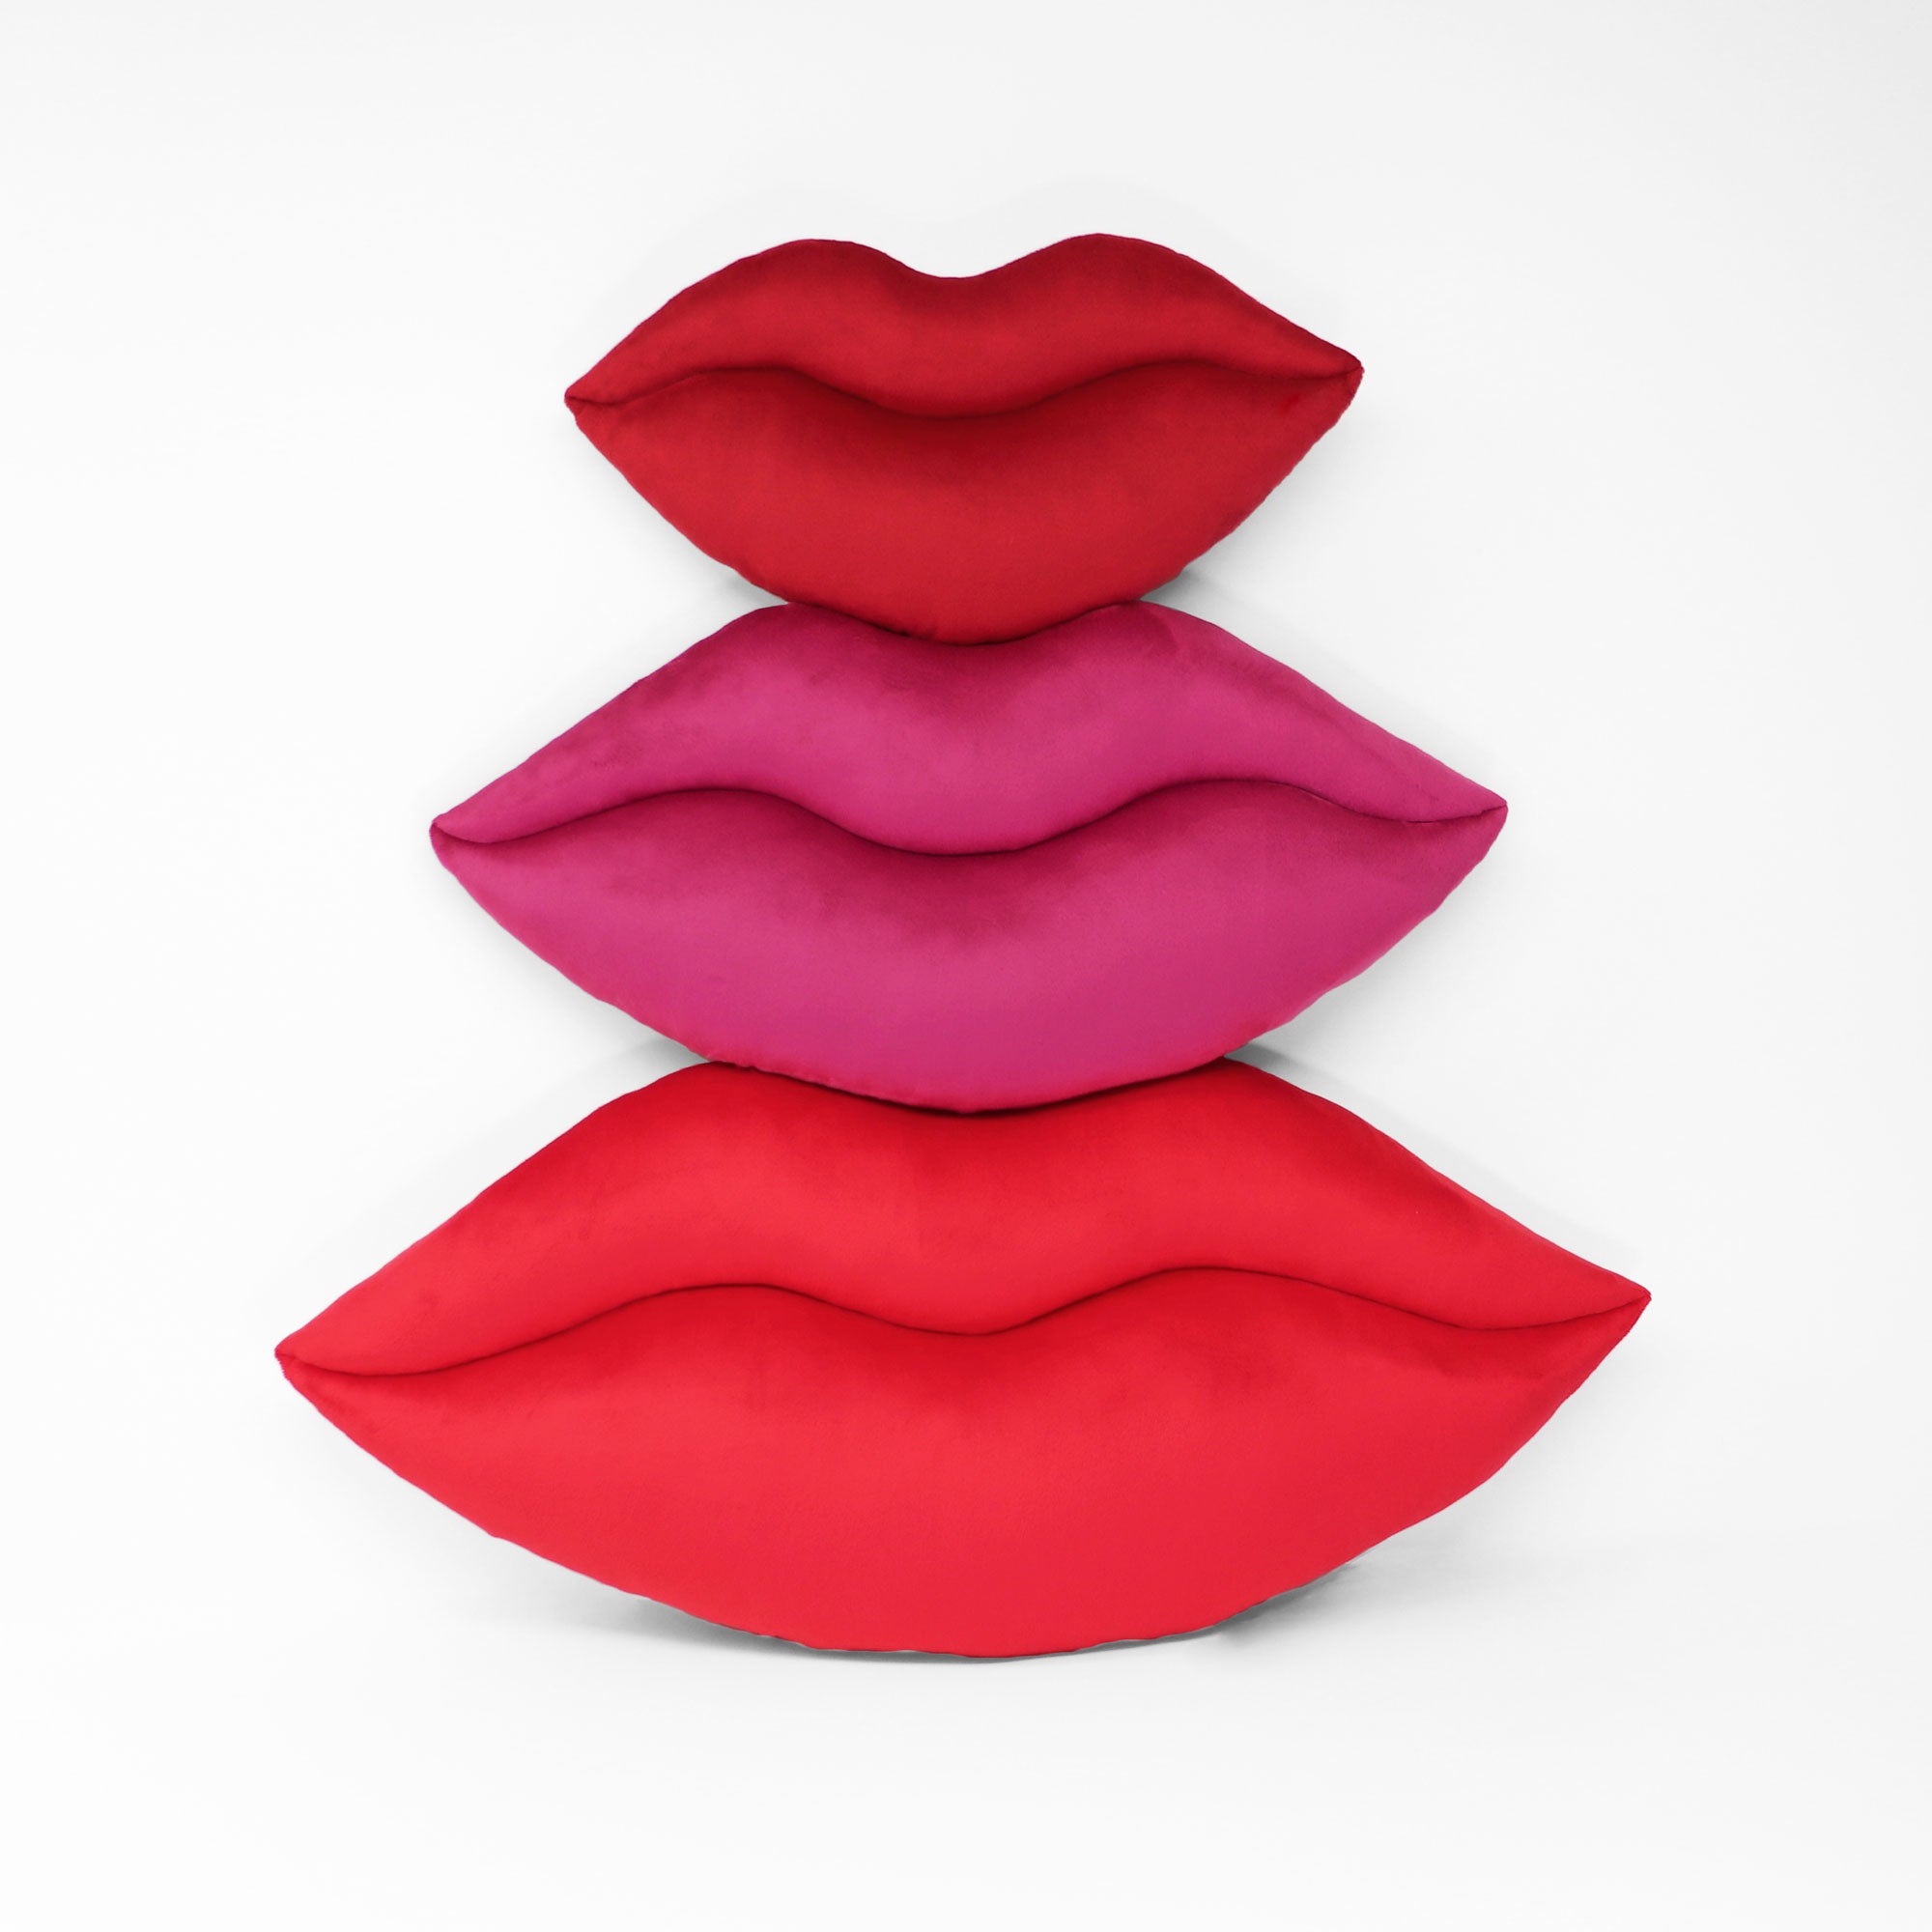 Lips shaped decorative throw pillows shown in three colors and three sizes.